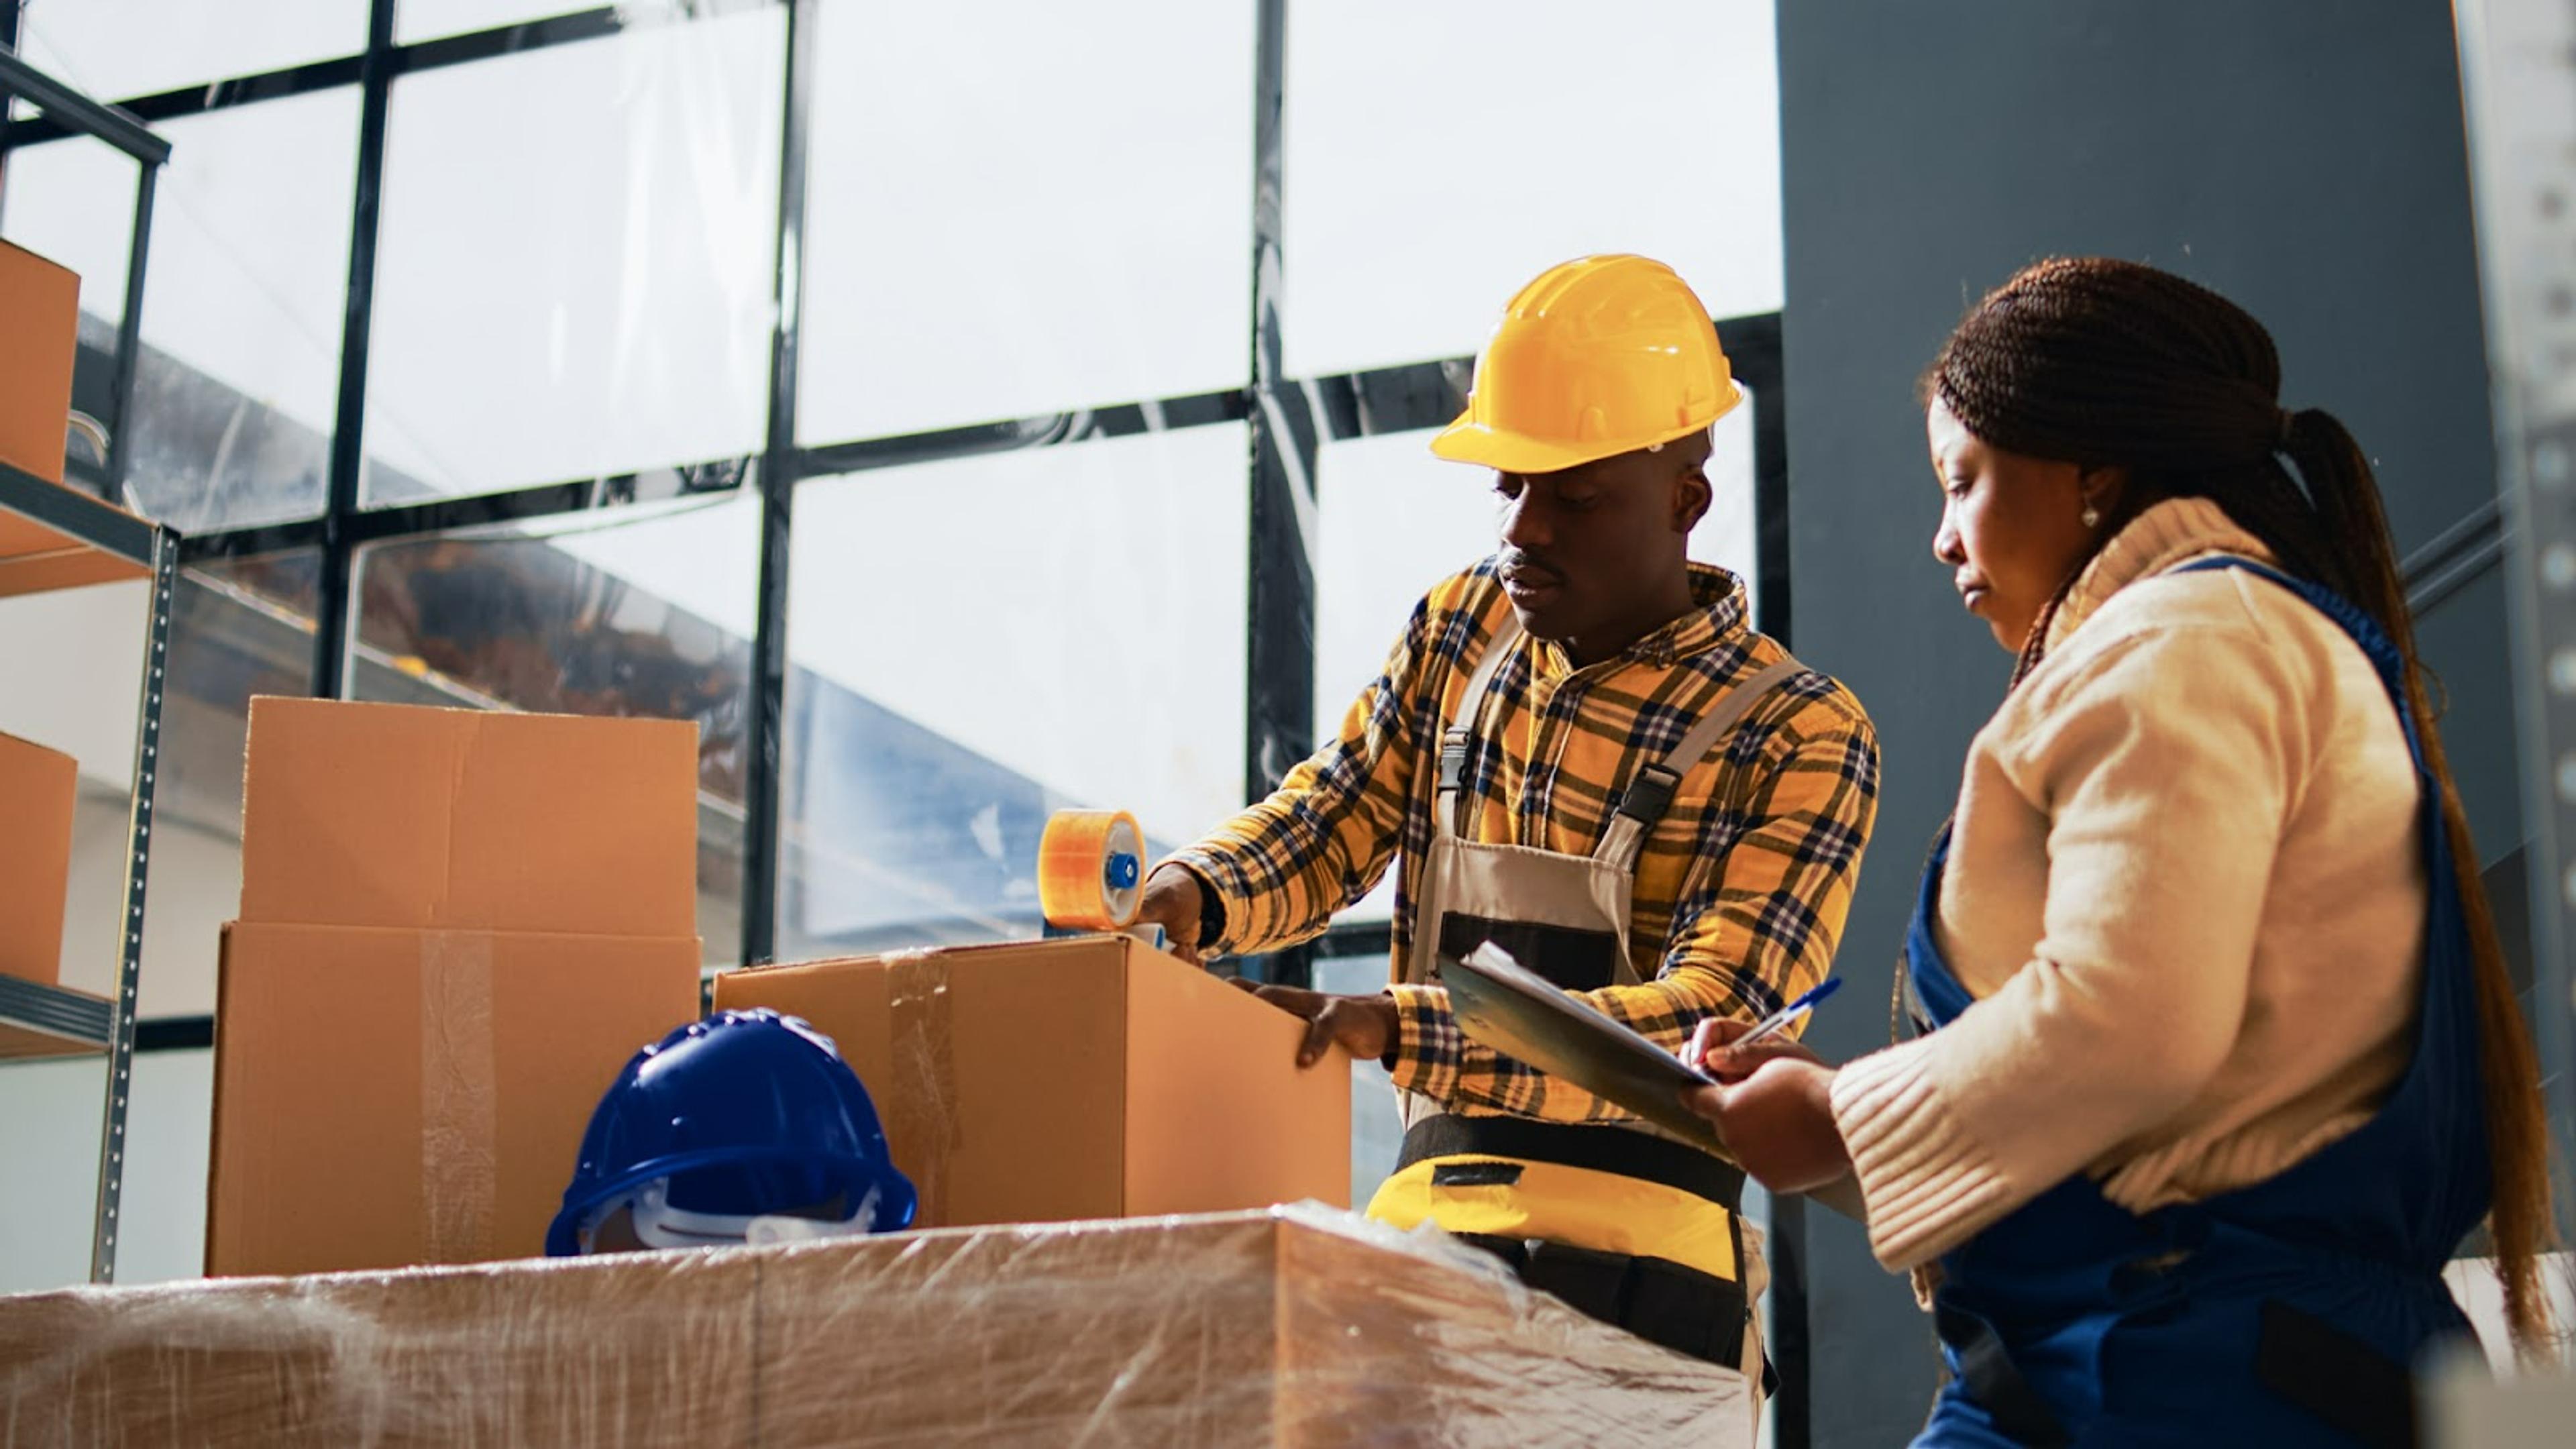 What Are The Types Of Fulfillment Centers?